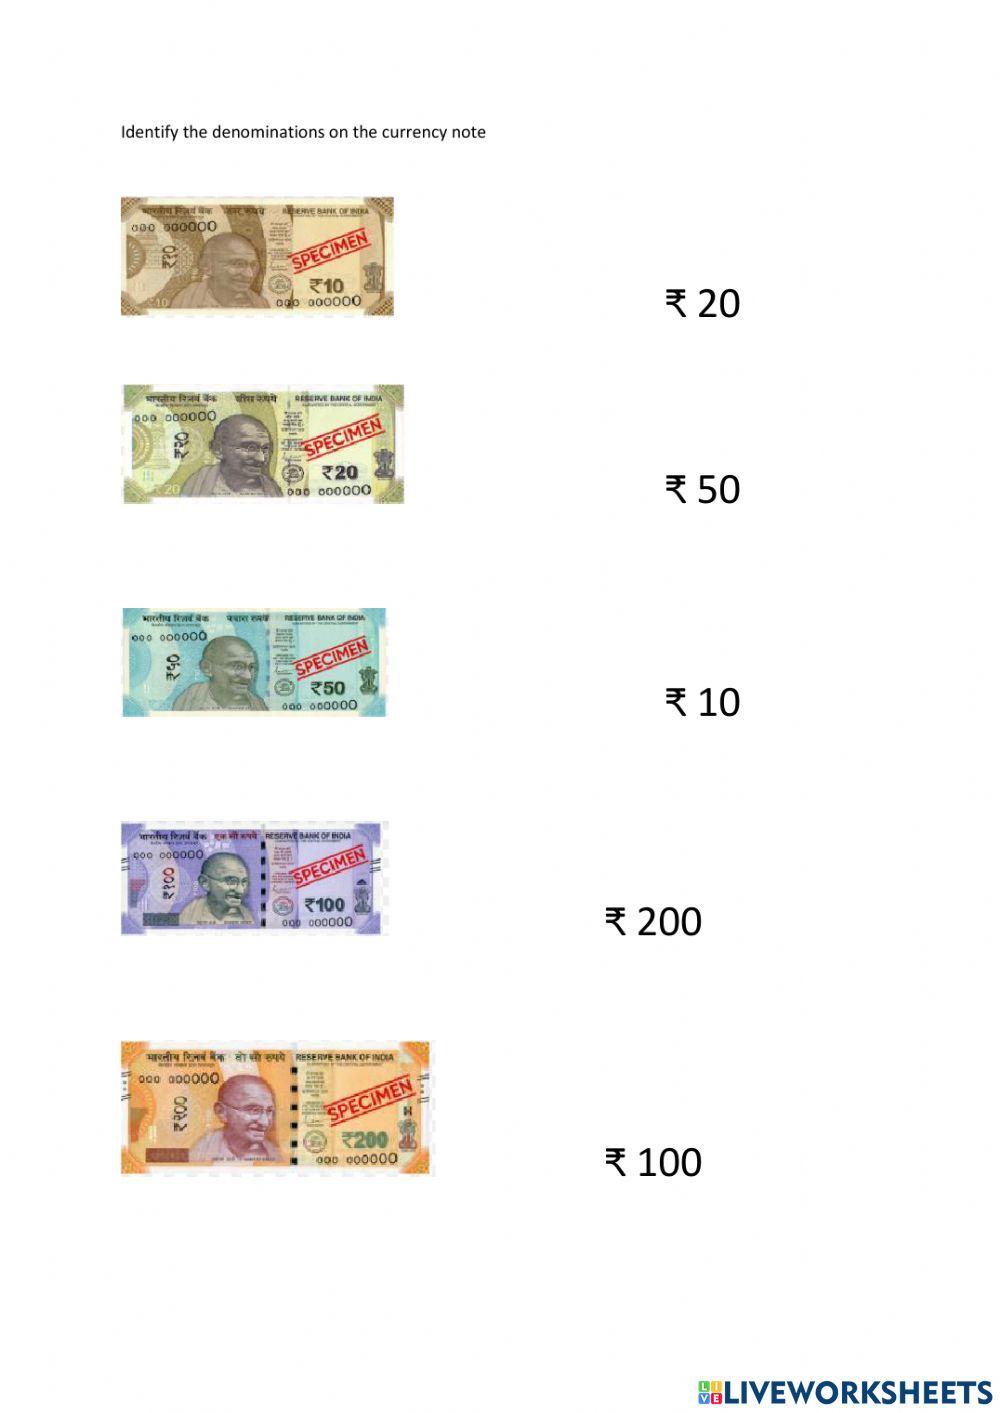 Match the currency